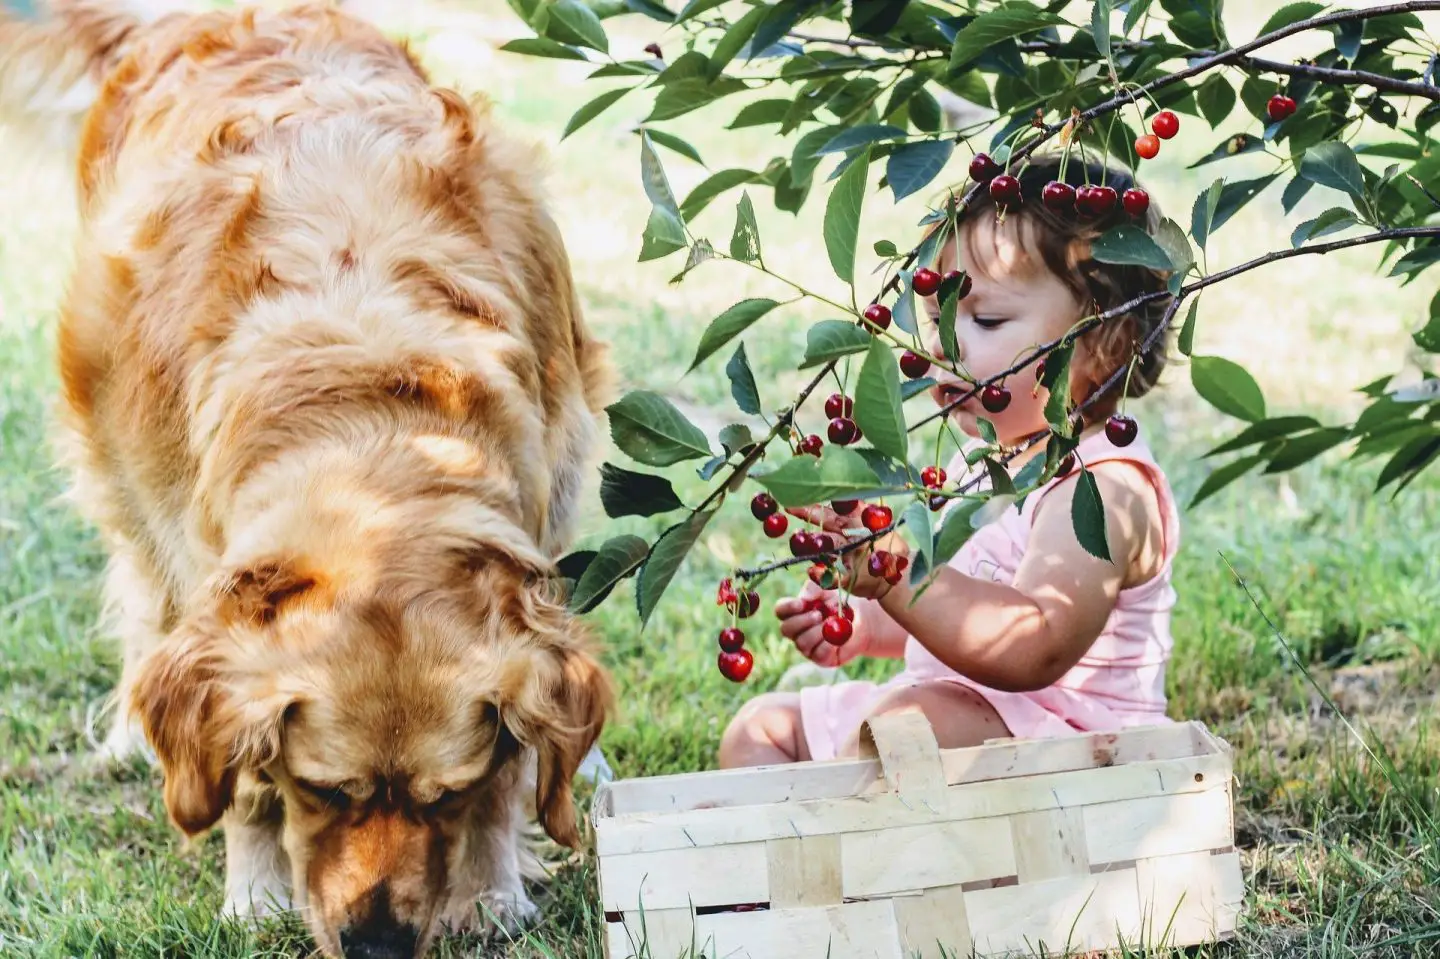 A little girl picking cherries with a dog